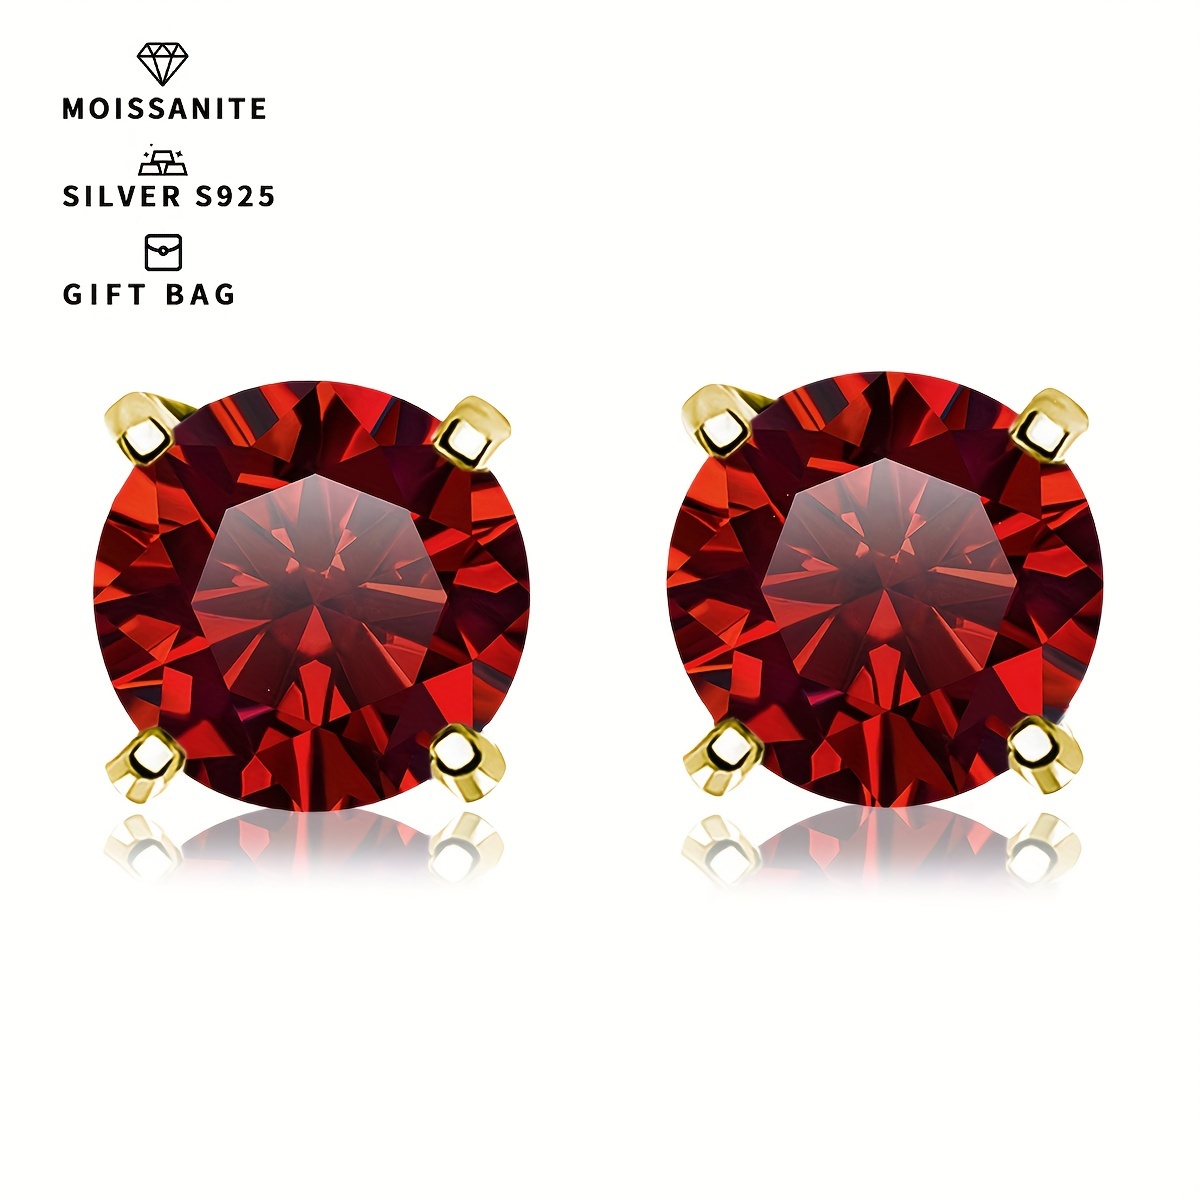 

1 Pair Elegant Round Red Moissanite Earrings, S925 Silver, Fashion Pop Four-claw Design For Women, Available In 0.5ct/1ct/2ct/3ct With Gift Bag - Simple Style Jewelry